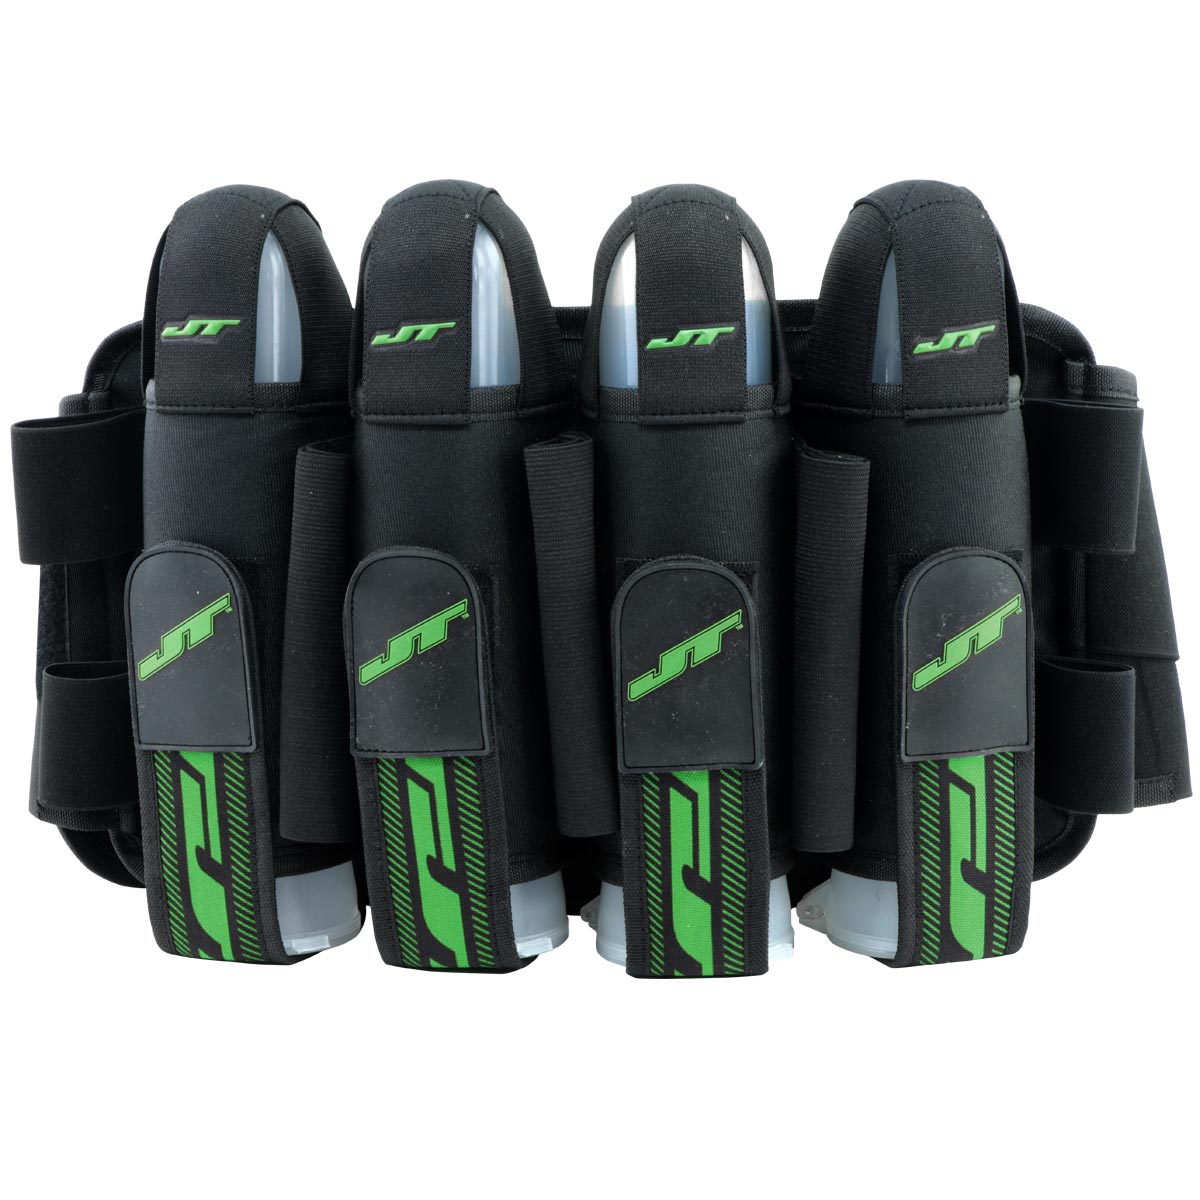 JT PAINTBALL / NXE FX PROFESSIONAL LEVEL HARNESS - 4+7